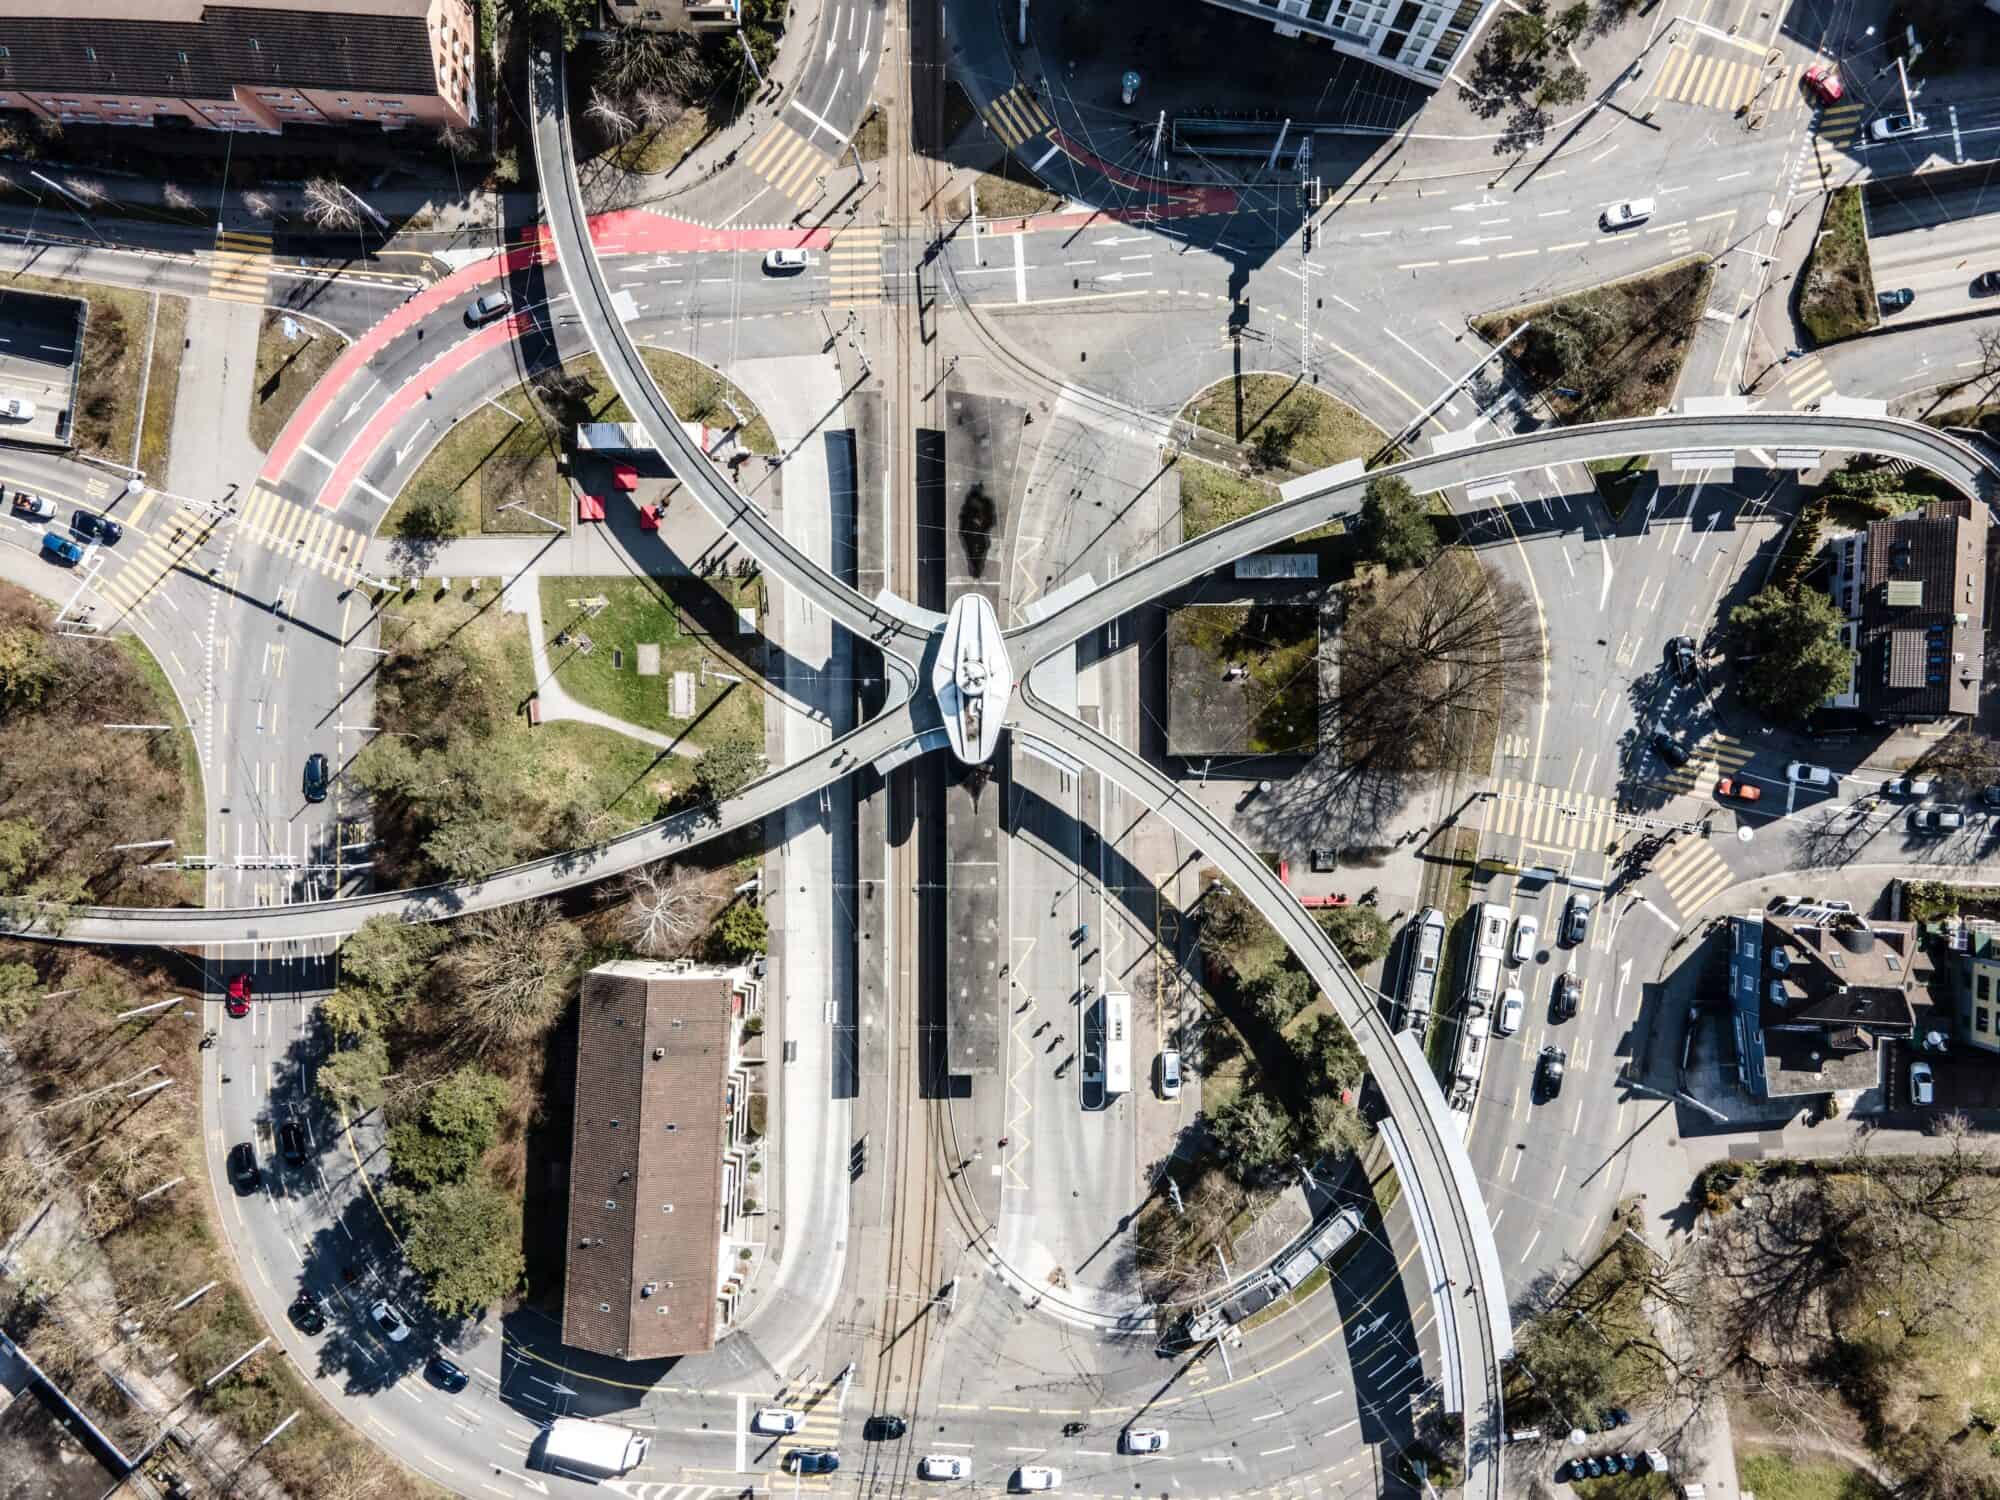 Overhead perspective of an infrastructure hub in a town where car traffic, bike lanes, tram lines and pedestrian walkways intersect.